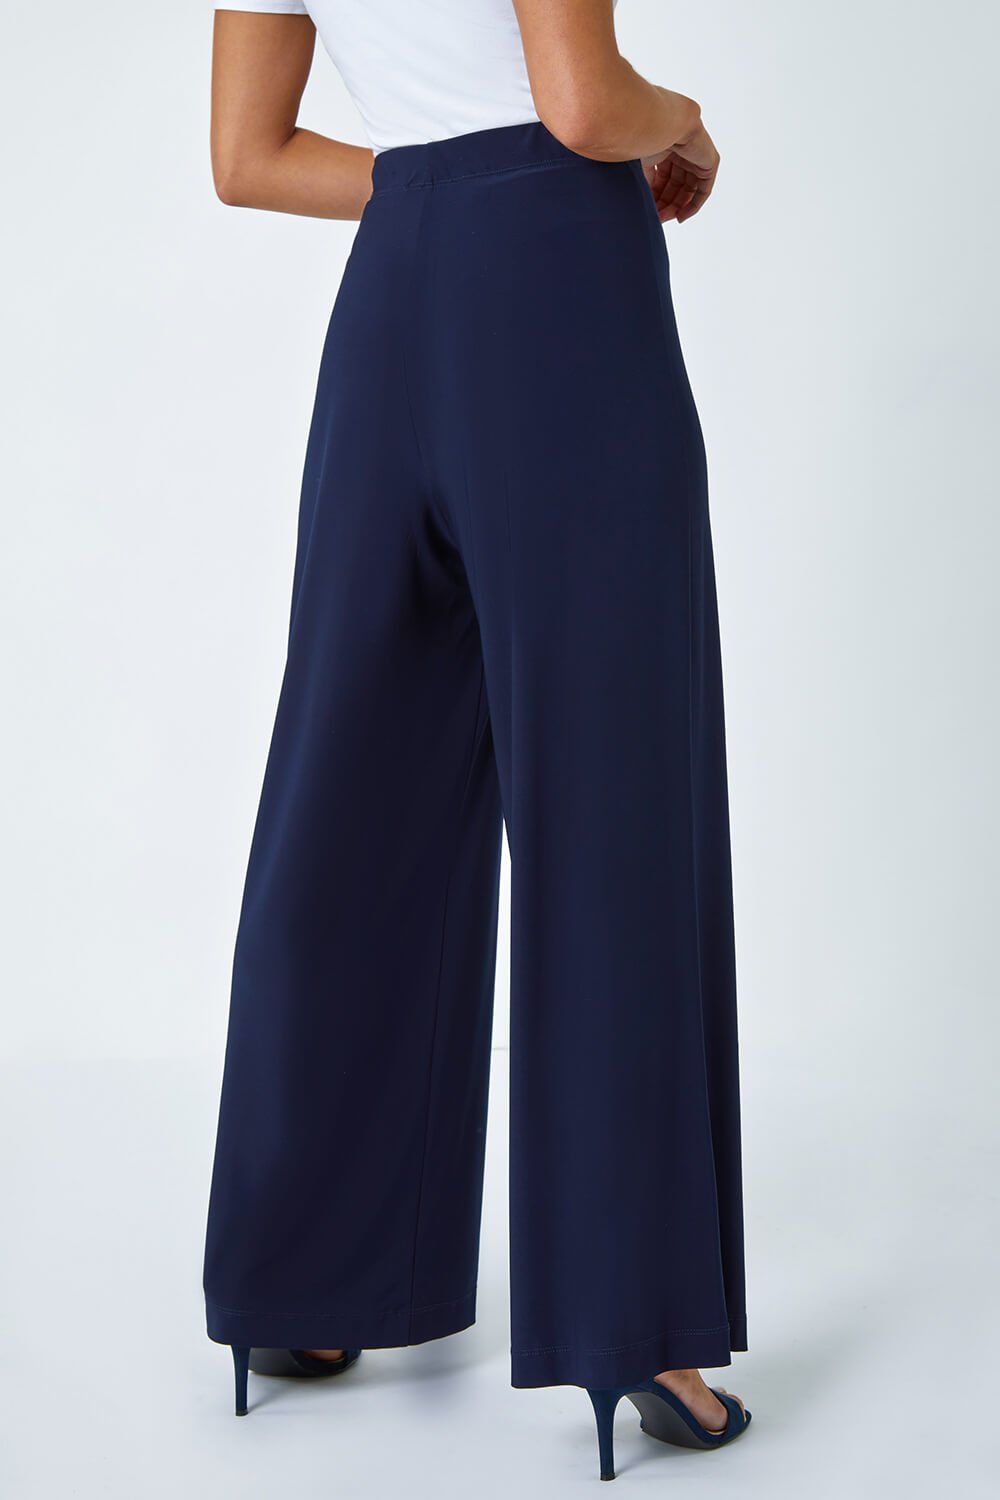 Navy  Petite Wide Leg Stretch Trouser, Image 3 of 5